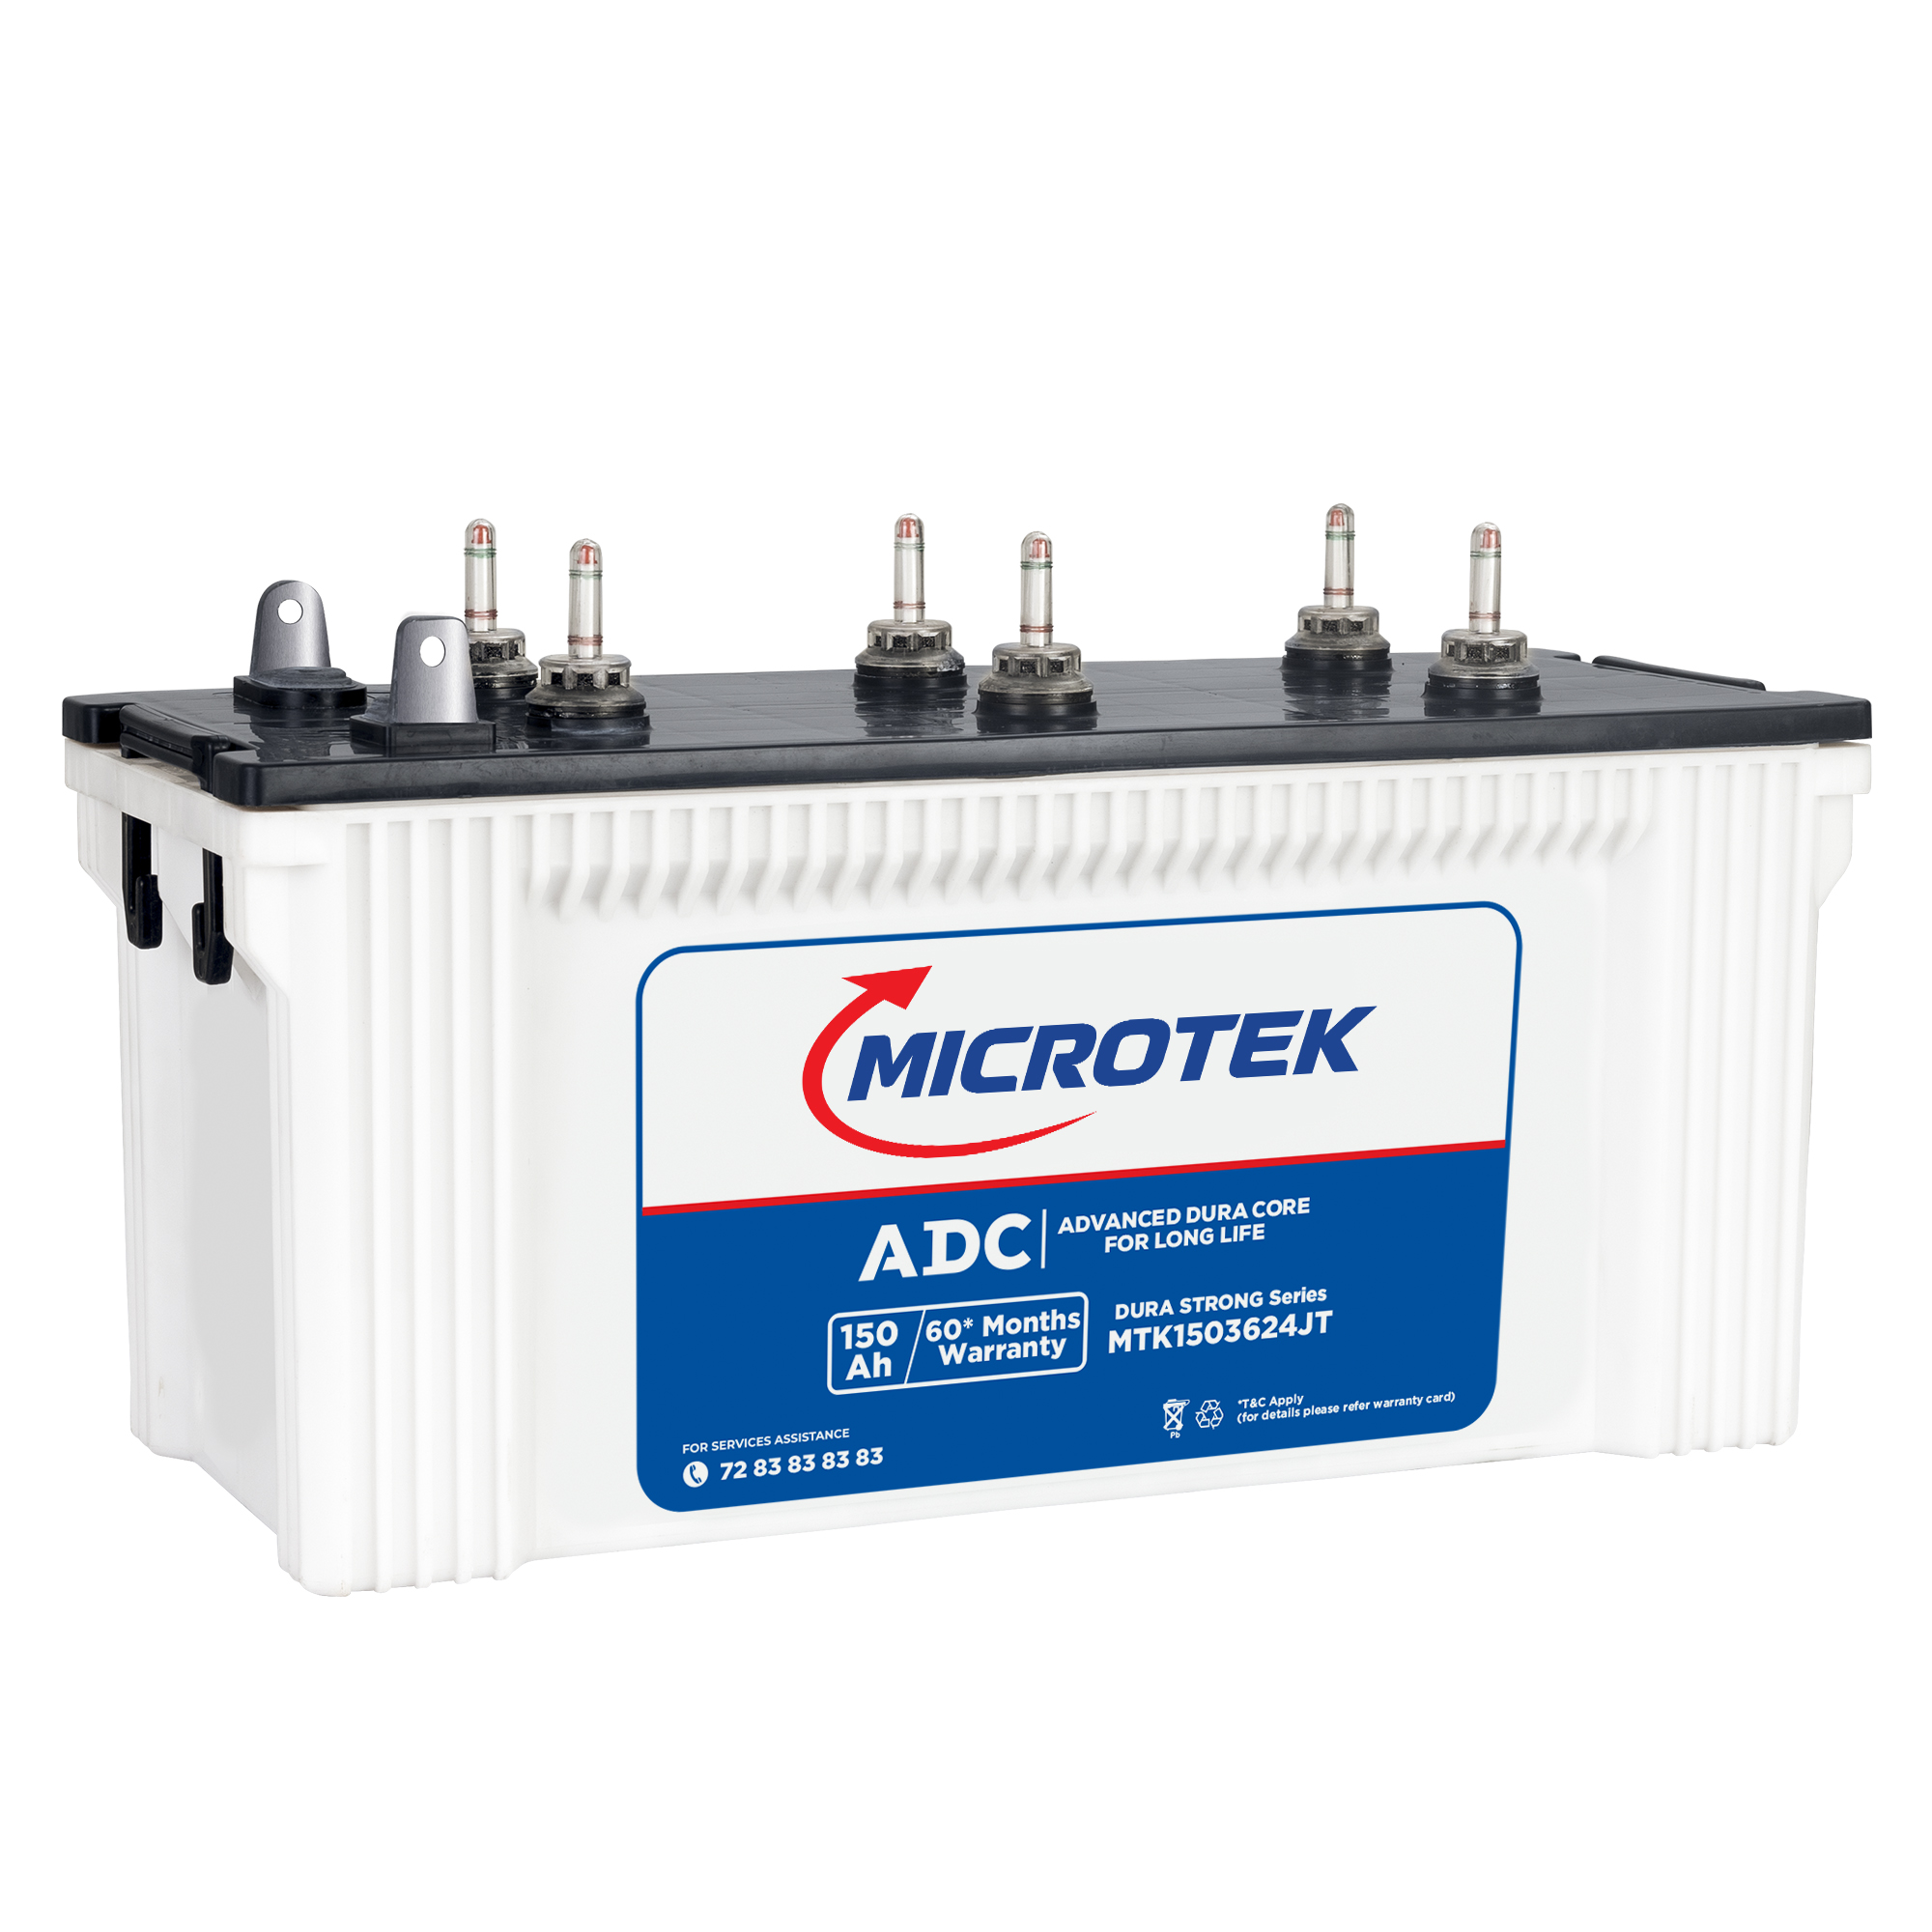 Microtek Dura STRONG MTK1503624JT 150Ah/12V Inverter Battery With Advanced Dura Core Technology